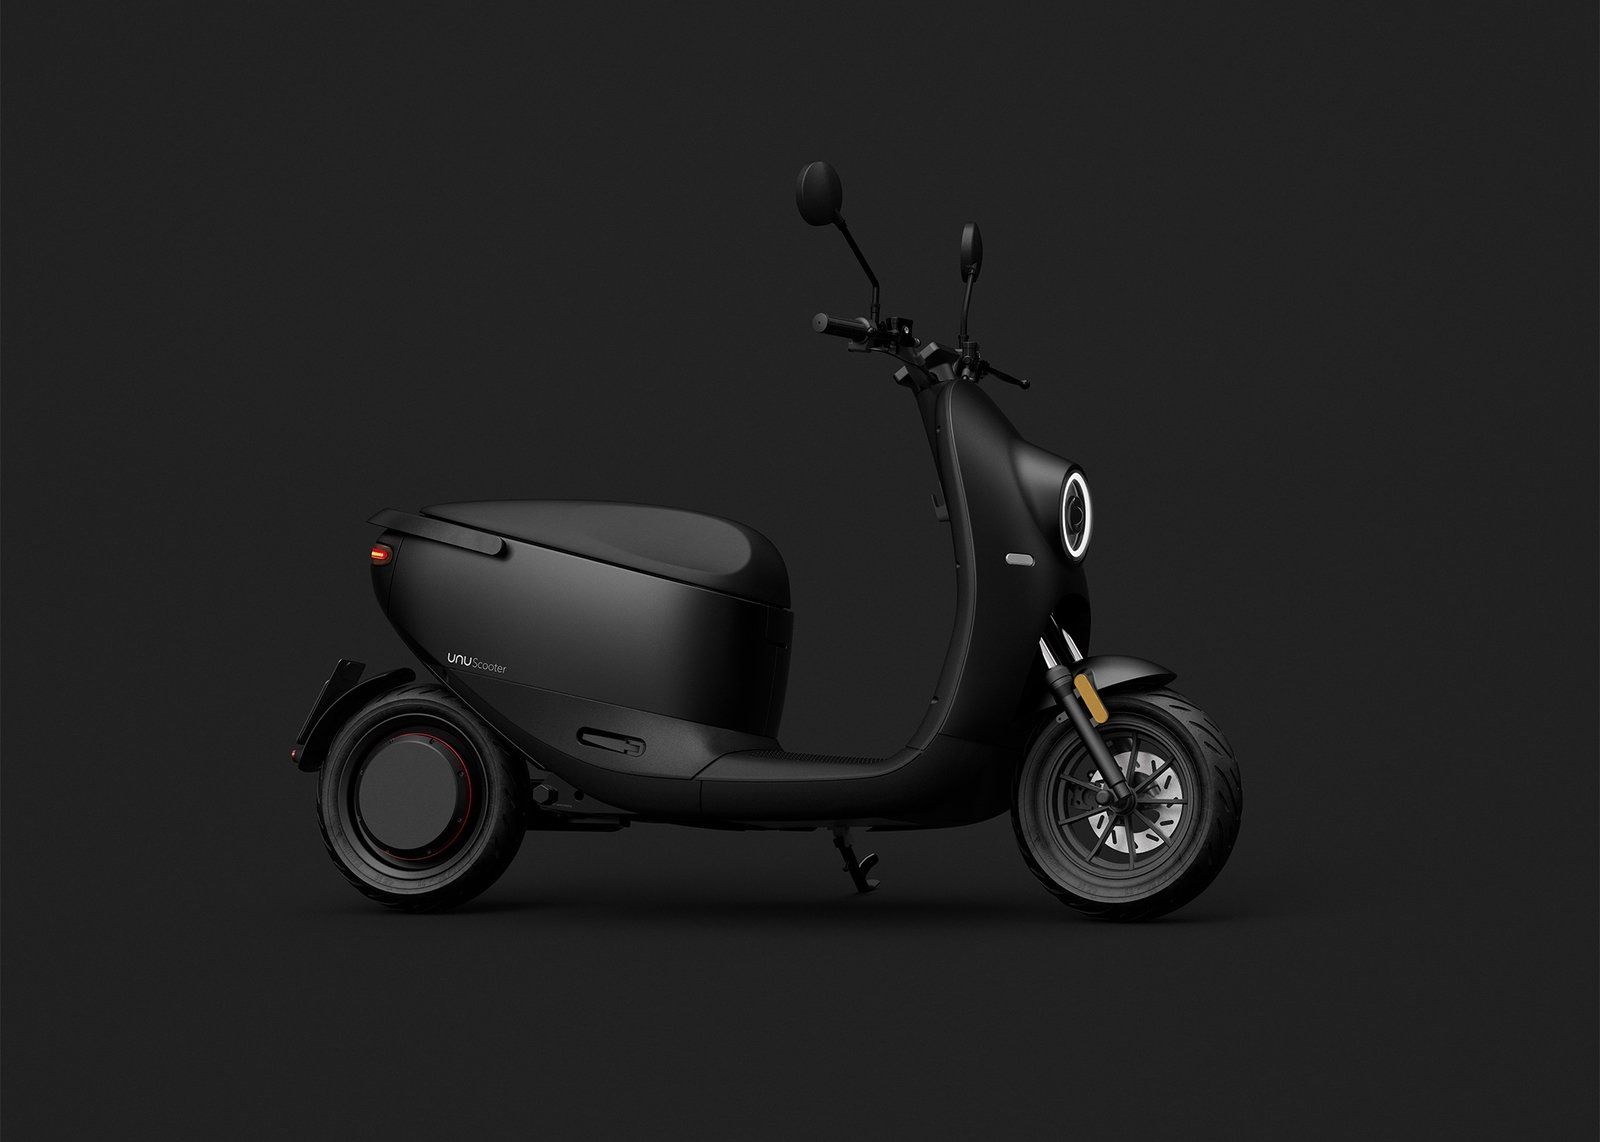 Unu's Electric Scooter Is Your Retro Styled Solution To City Traffic Picture, Photo, Wallpaper And Video